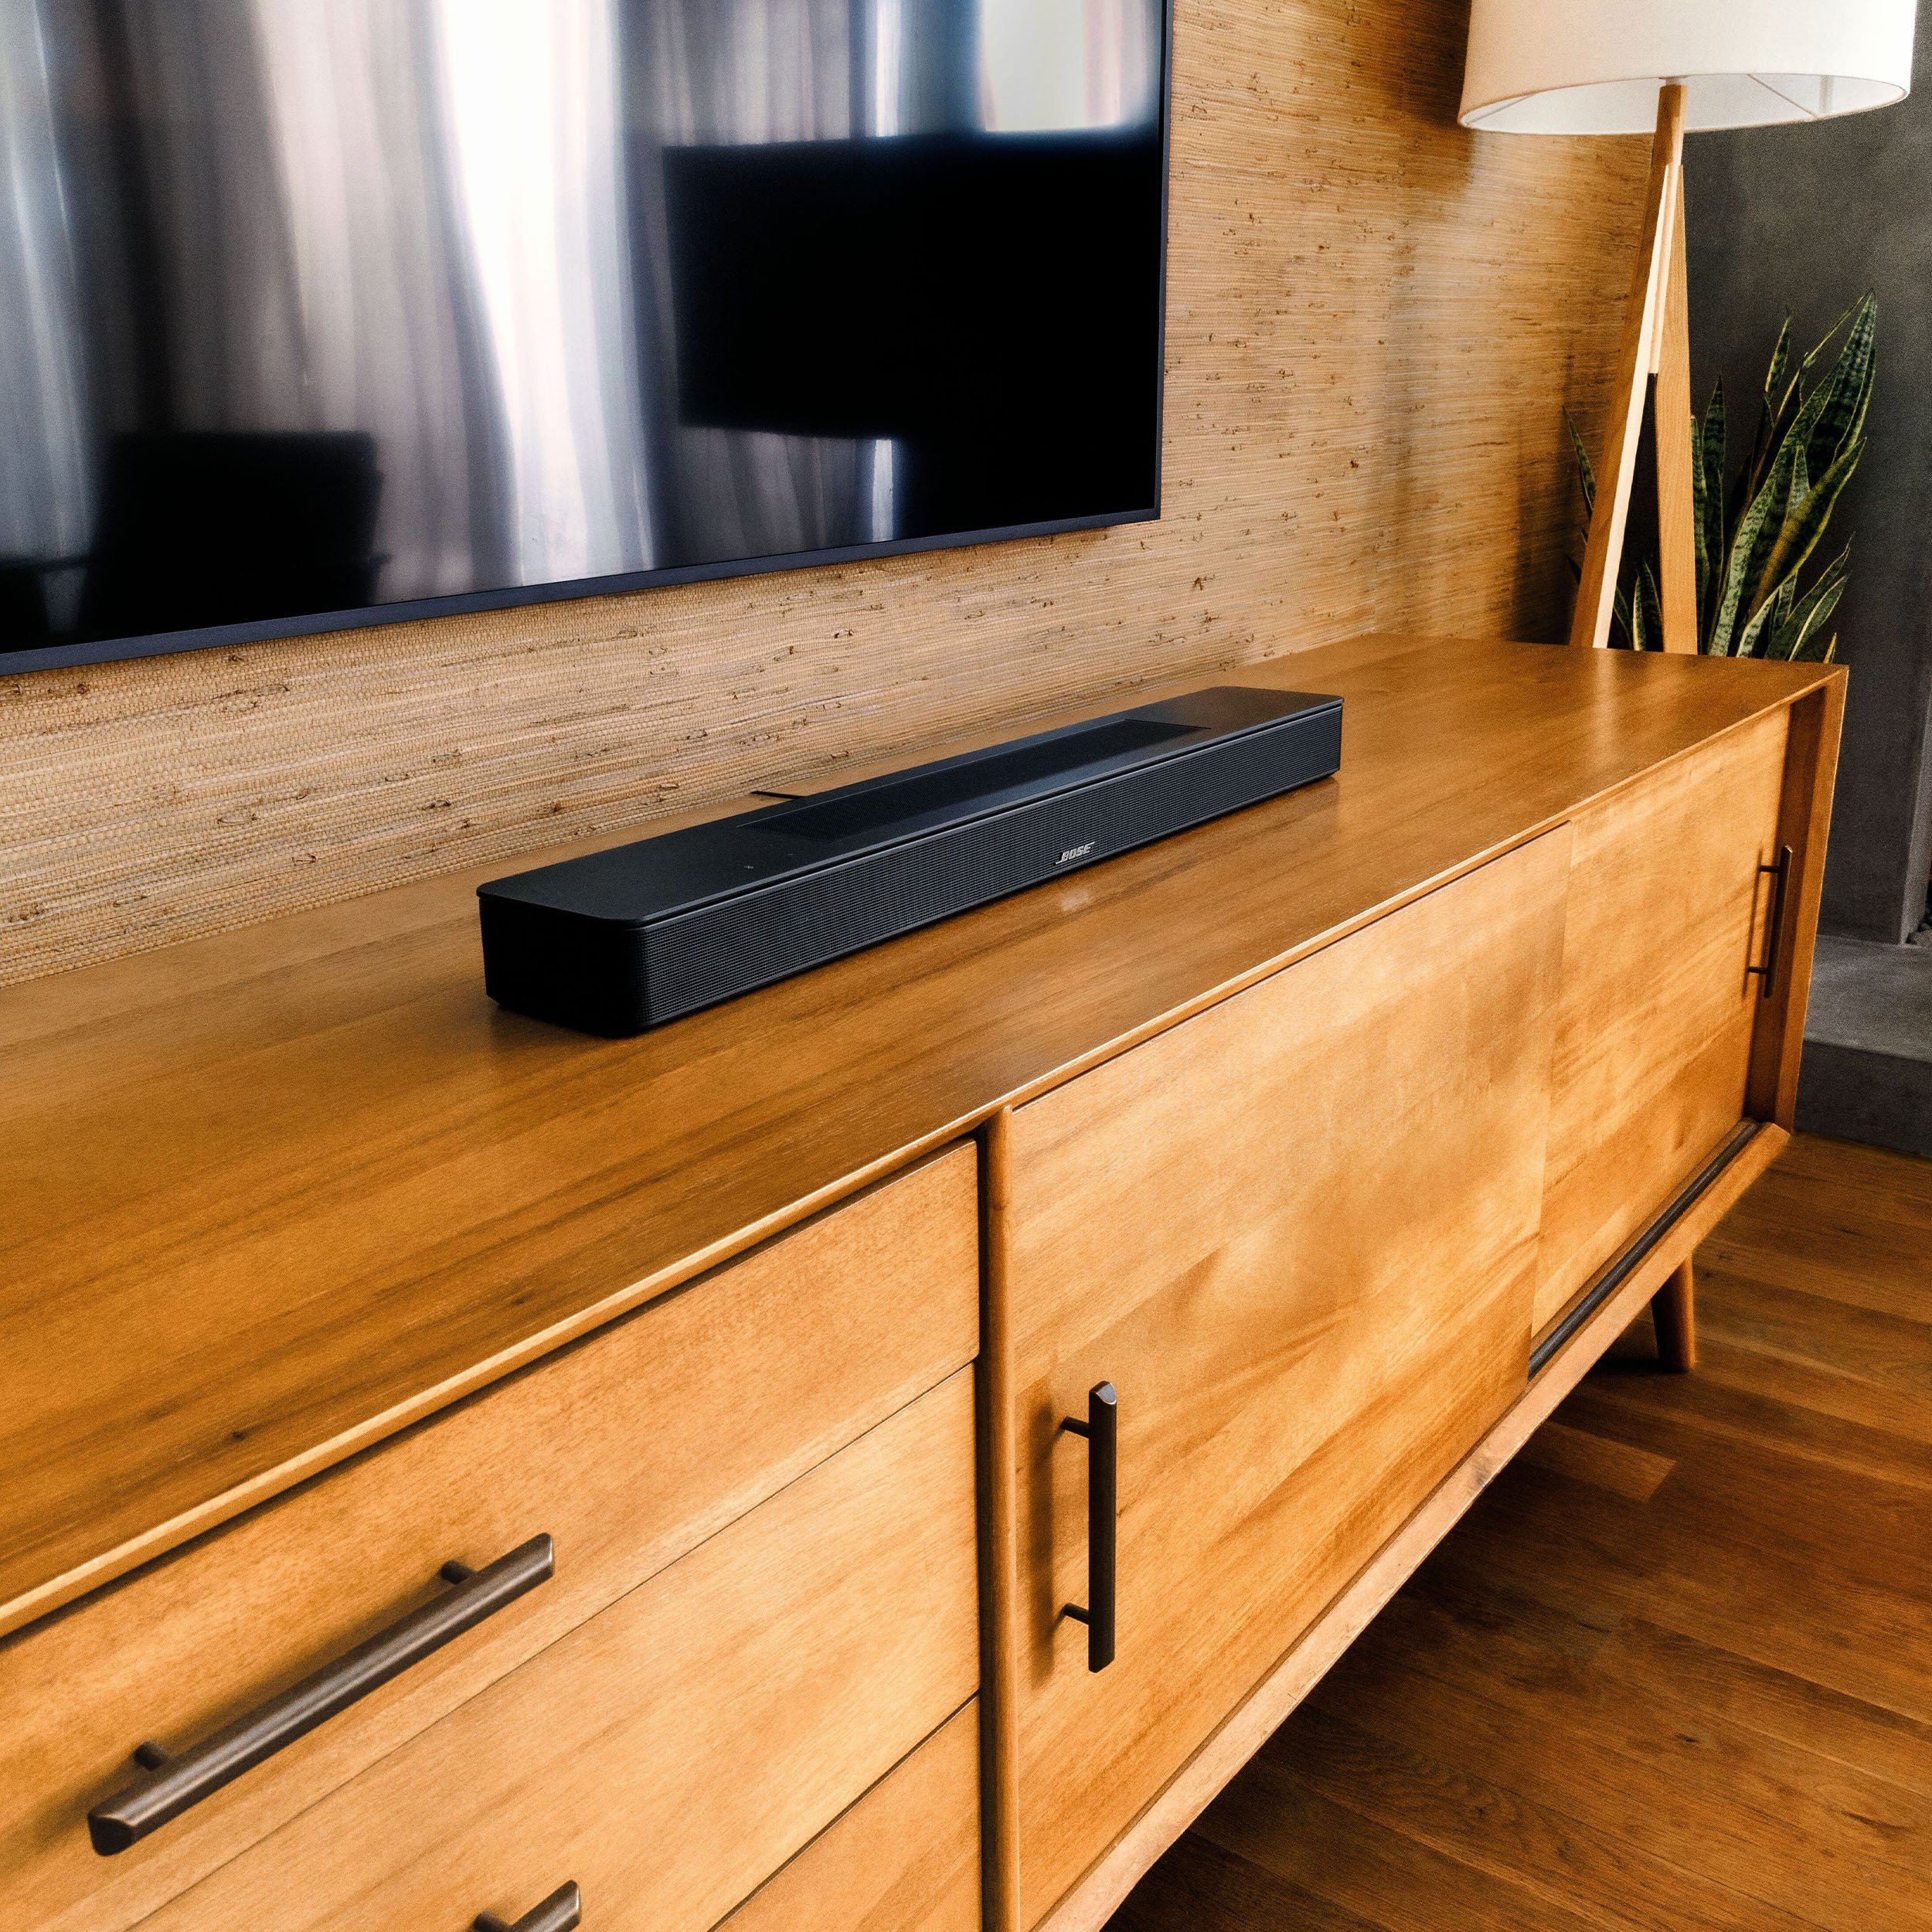 Bose Smart Soundbar 600 With Bluetooth And Dolby Atmos : Target